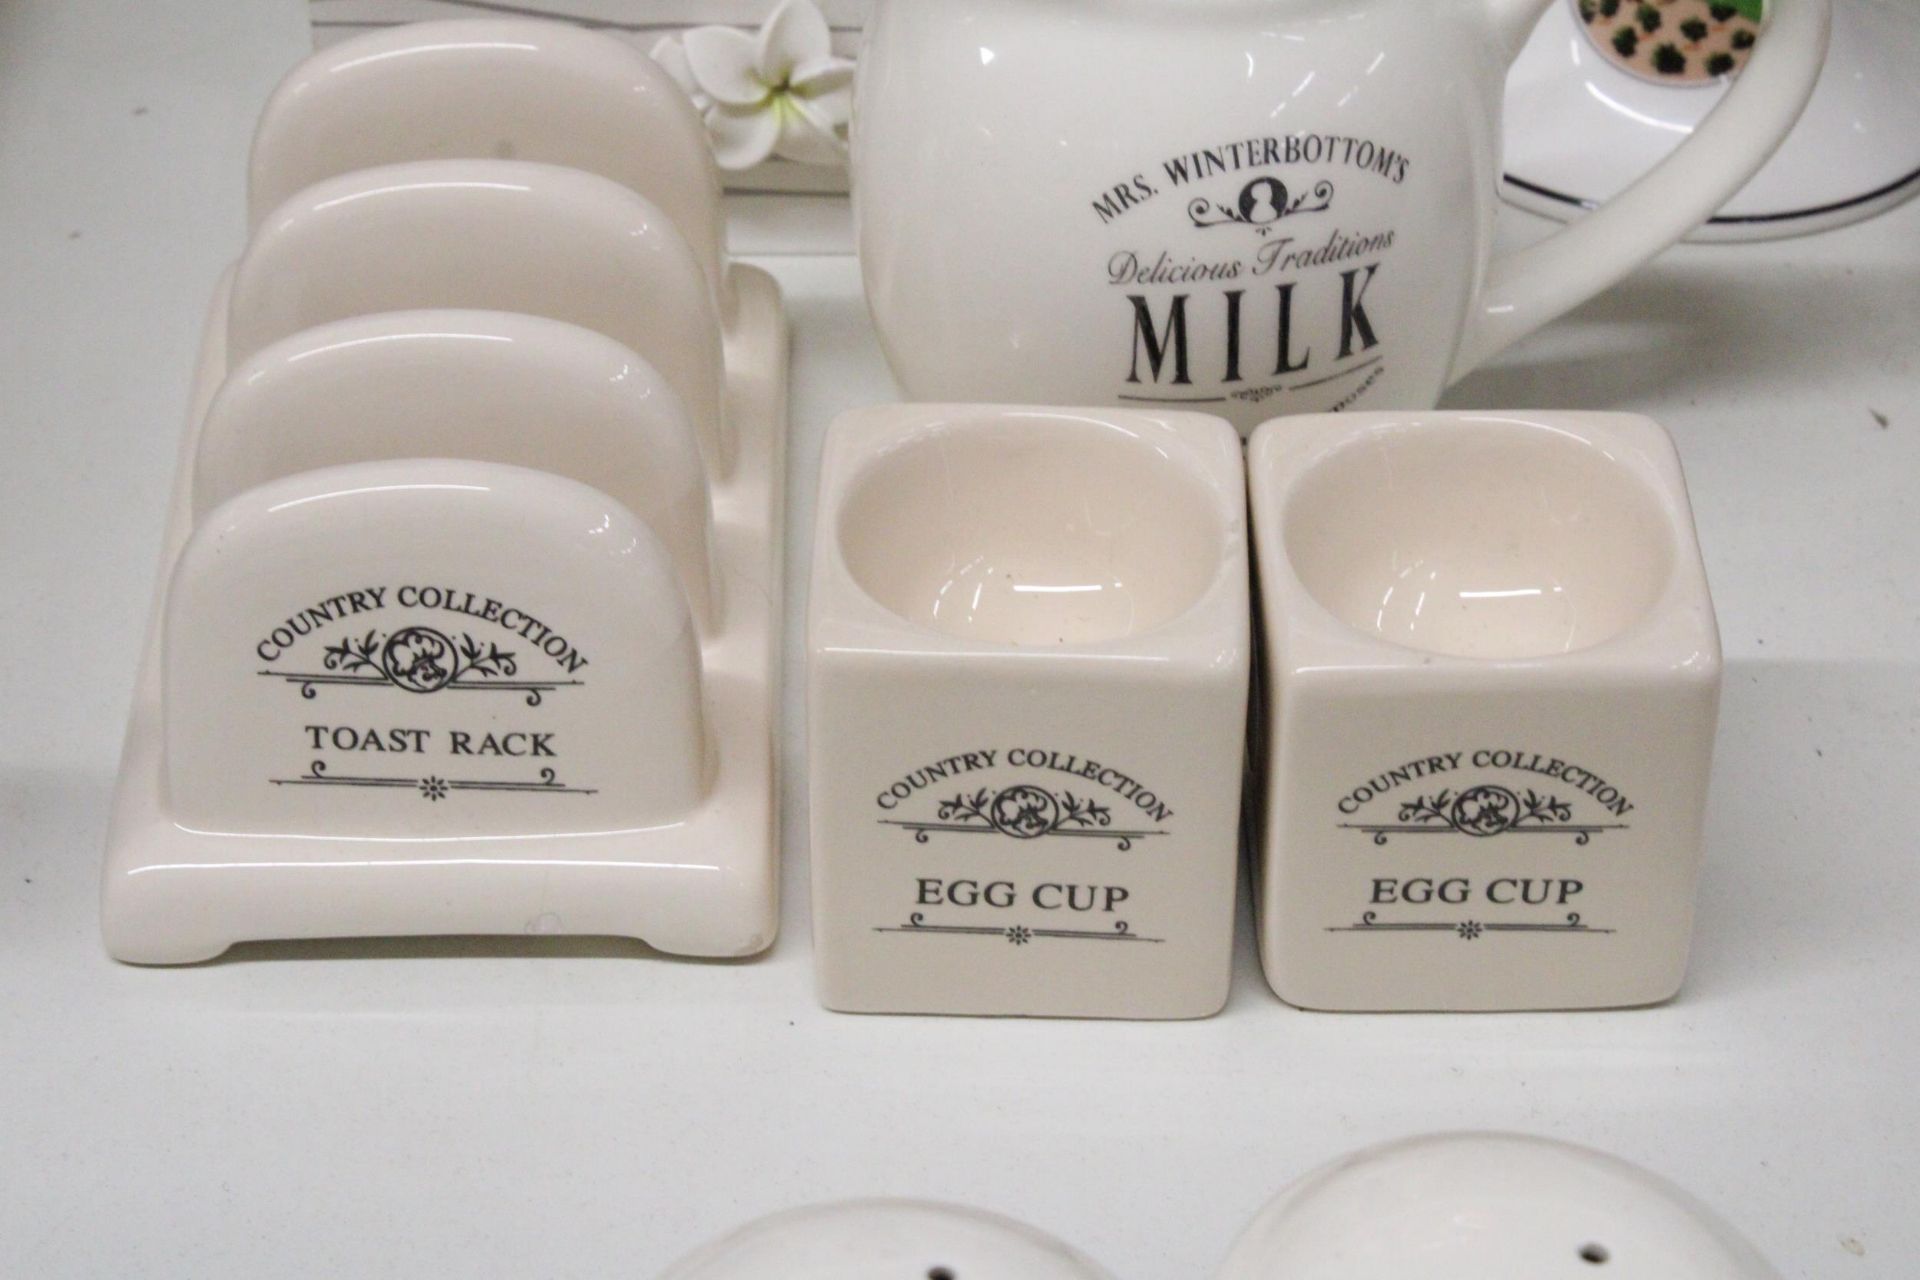 A SET OF MRS WINTERBOTTOM'S 'DELICIOUS TRADITIONS' TABLEWARE TO INCLUDE A MILK JUG, OIL AND - Image 3 of 5